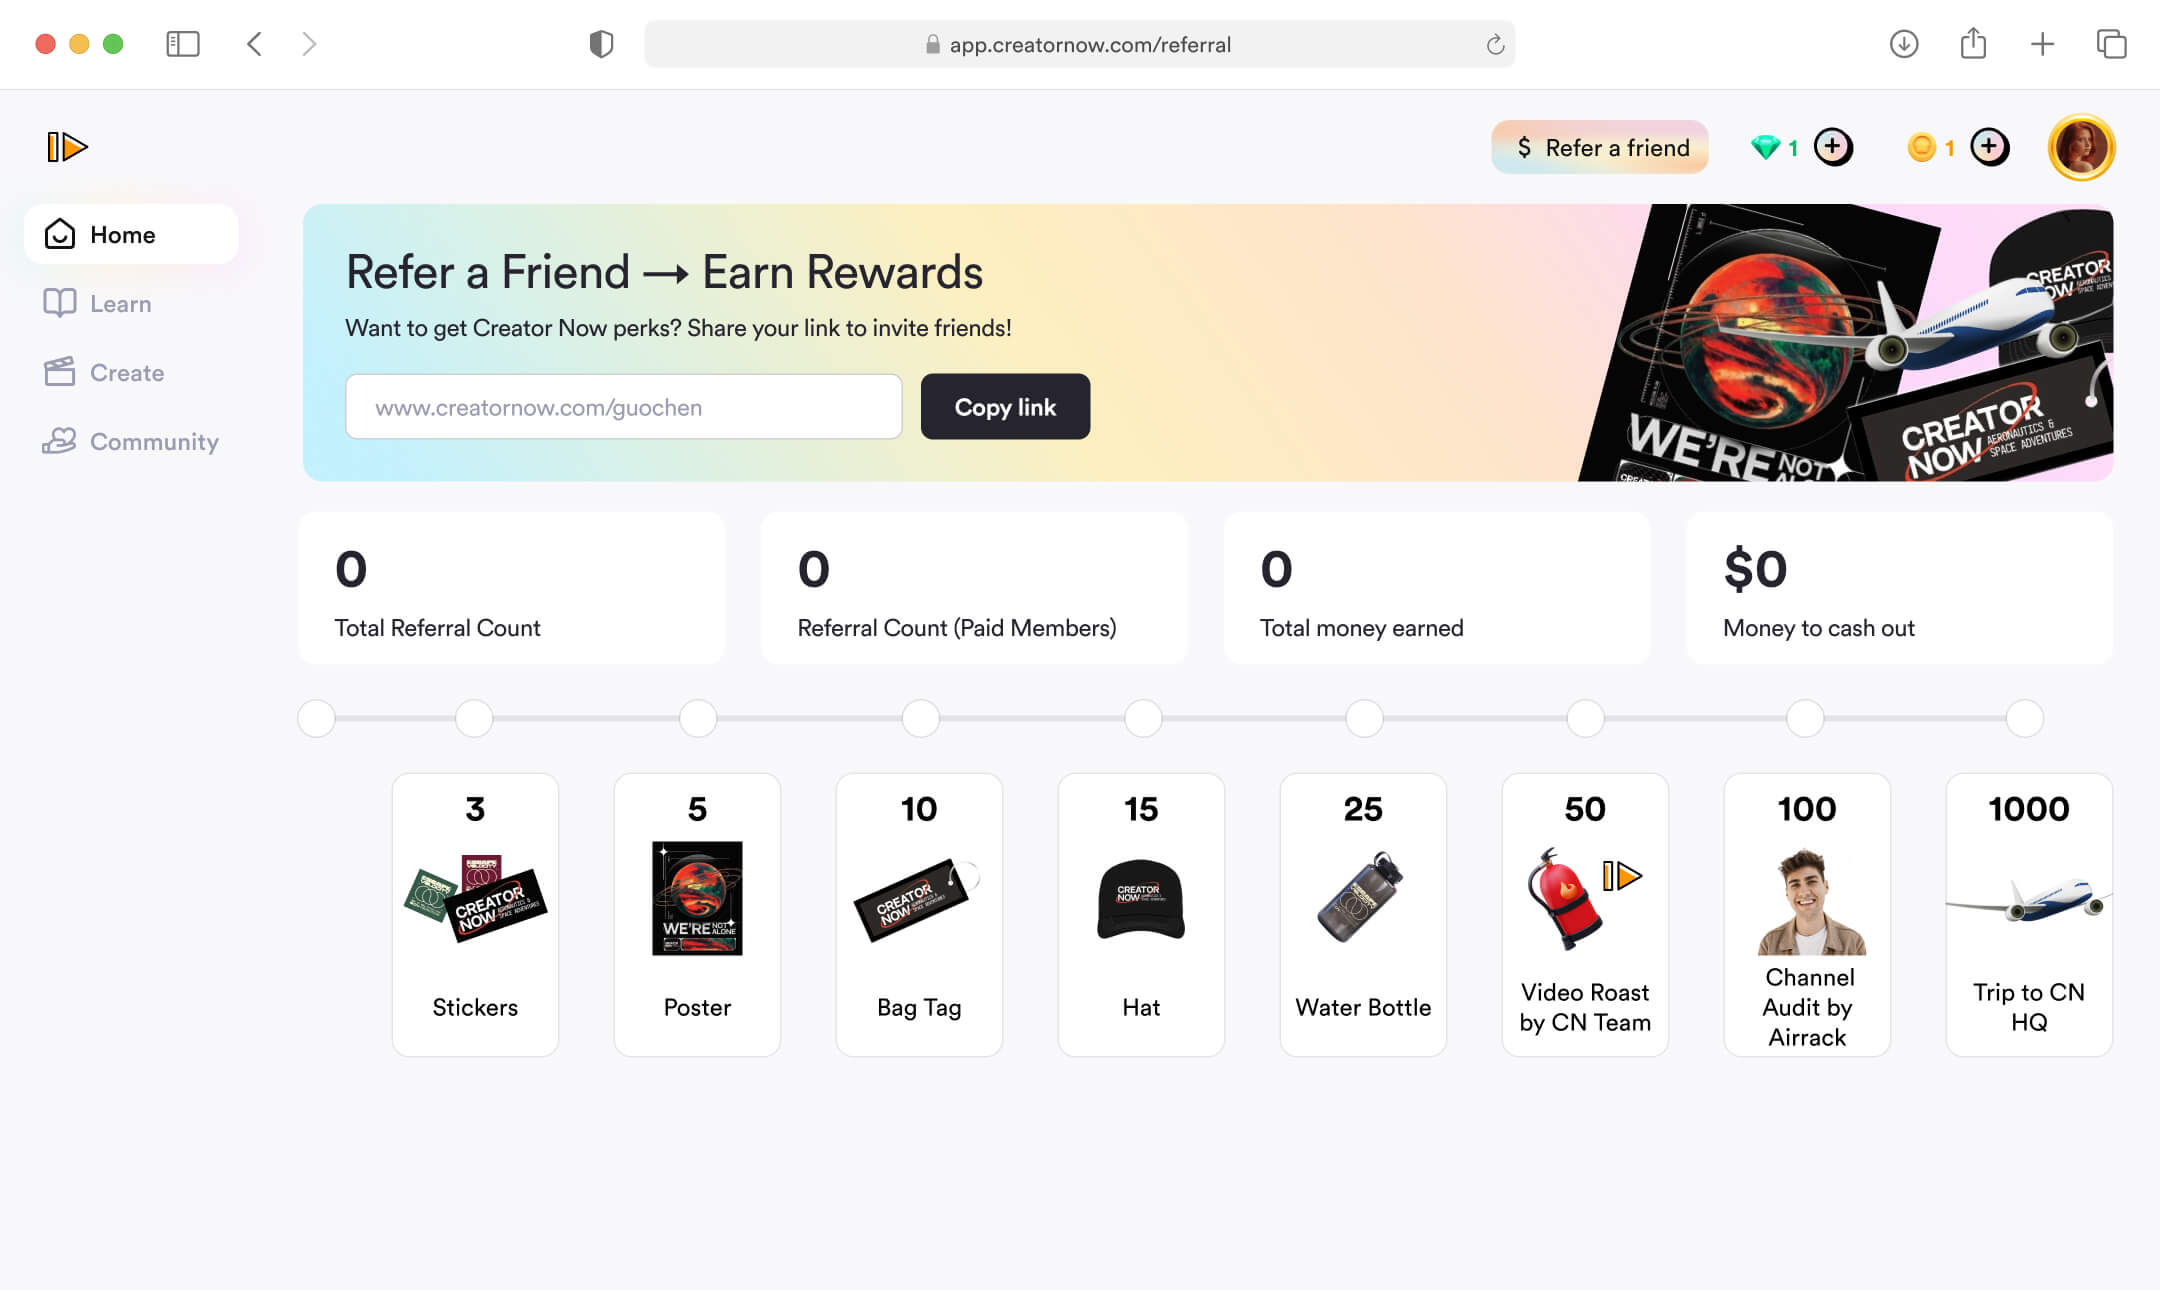 Referral page higlighting referral stats and different levels of rewards based on referral count